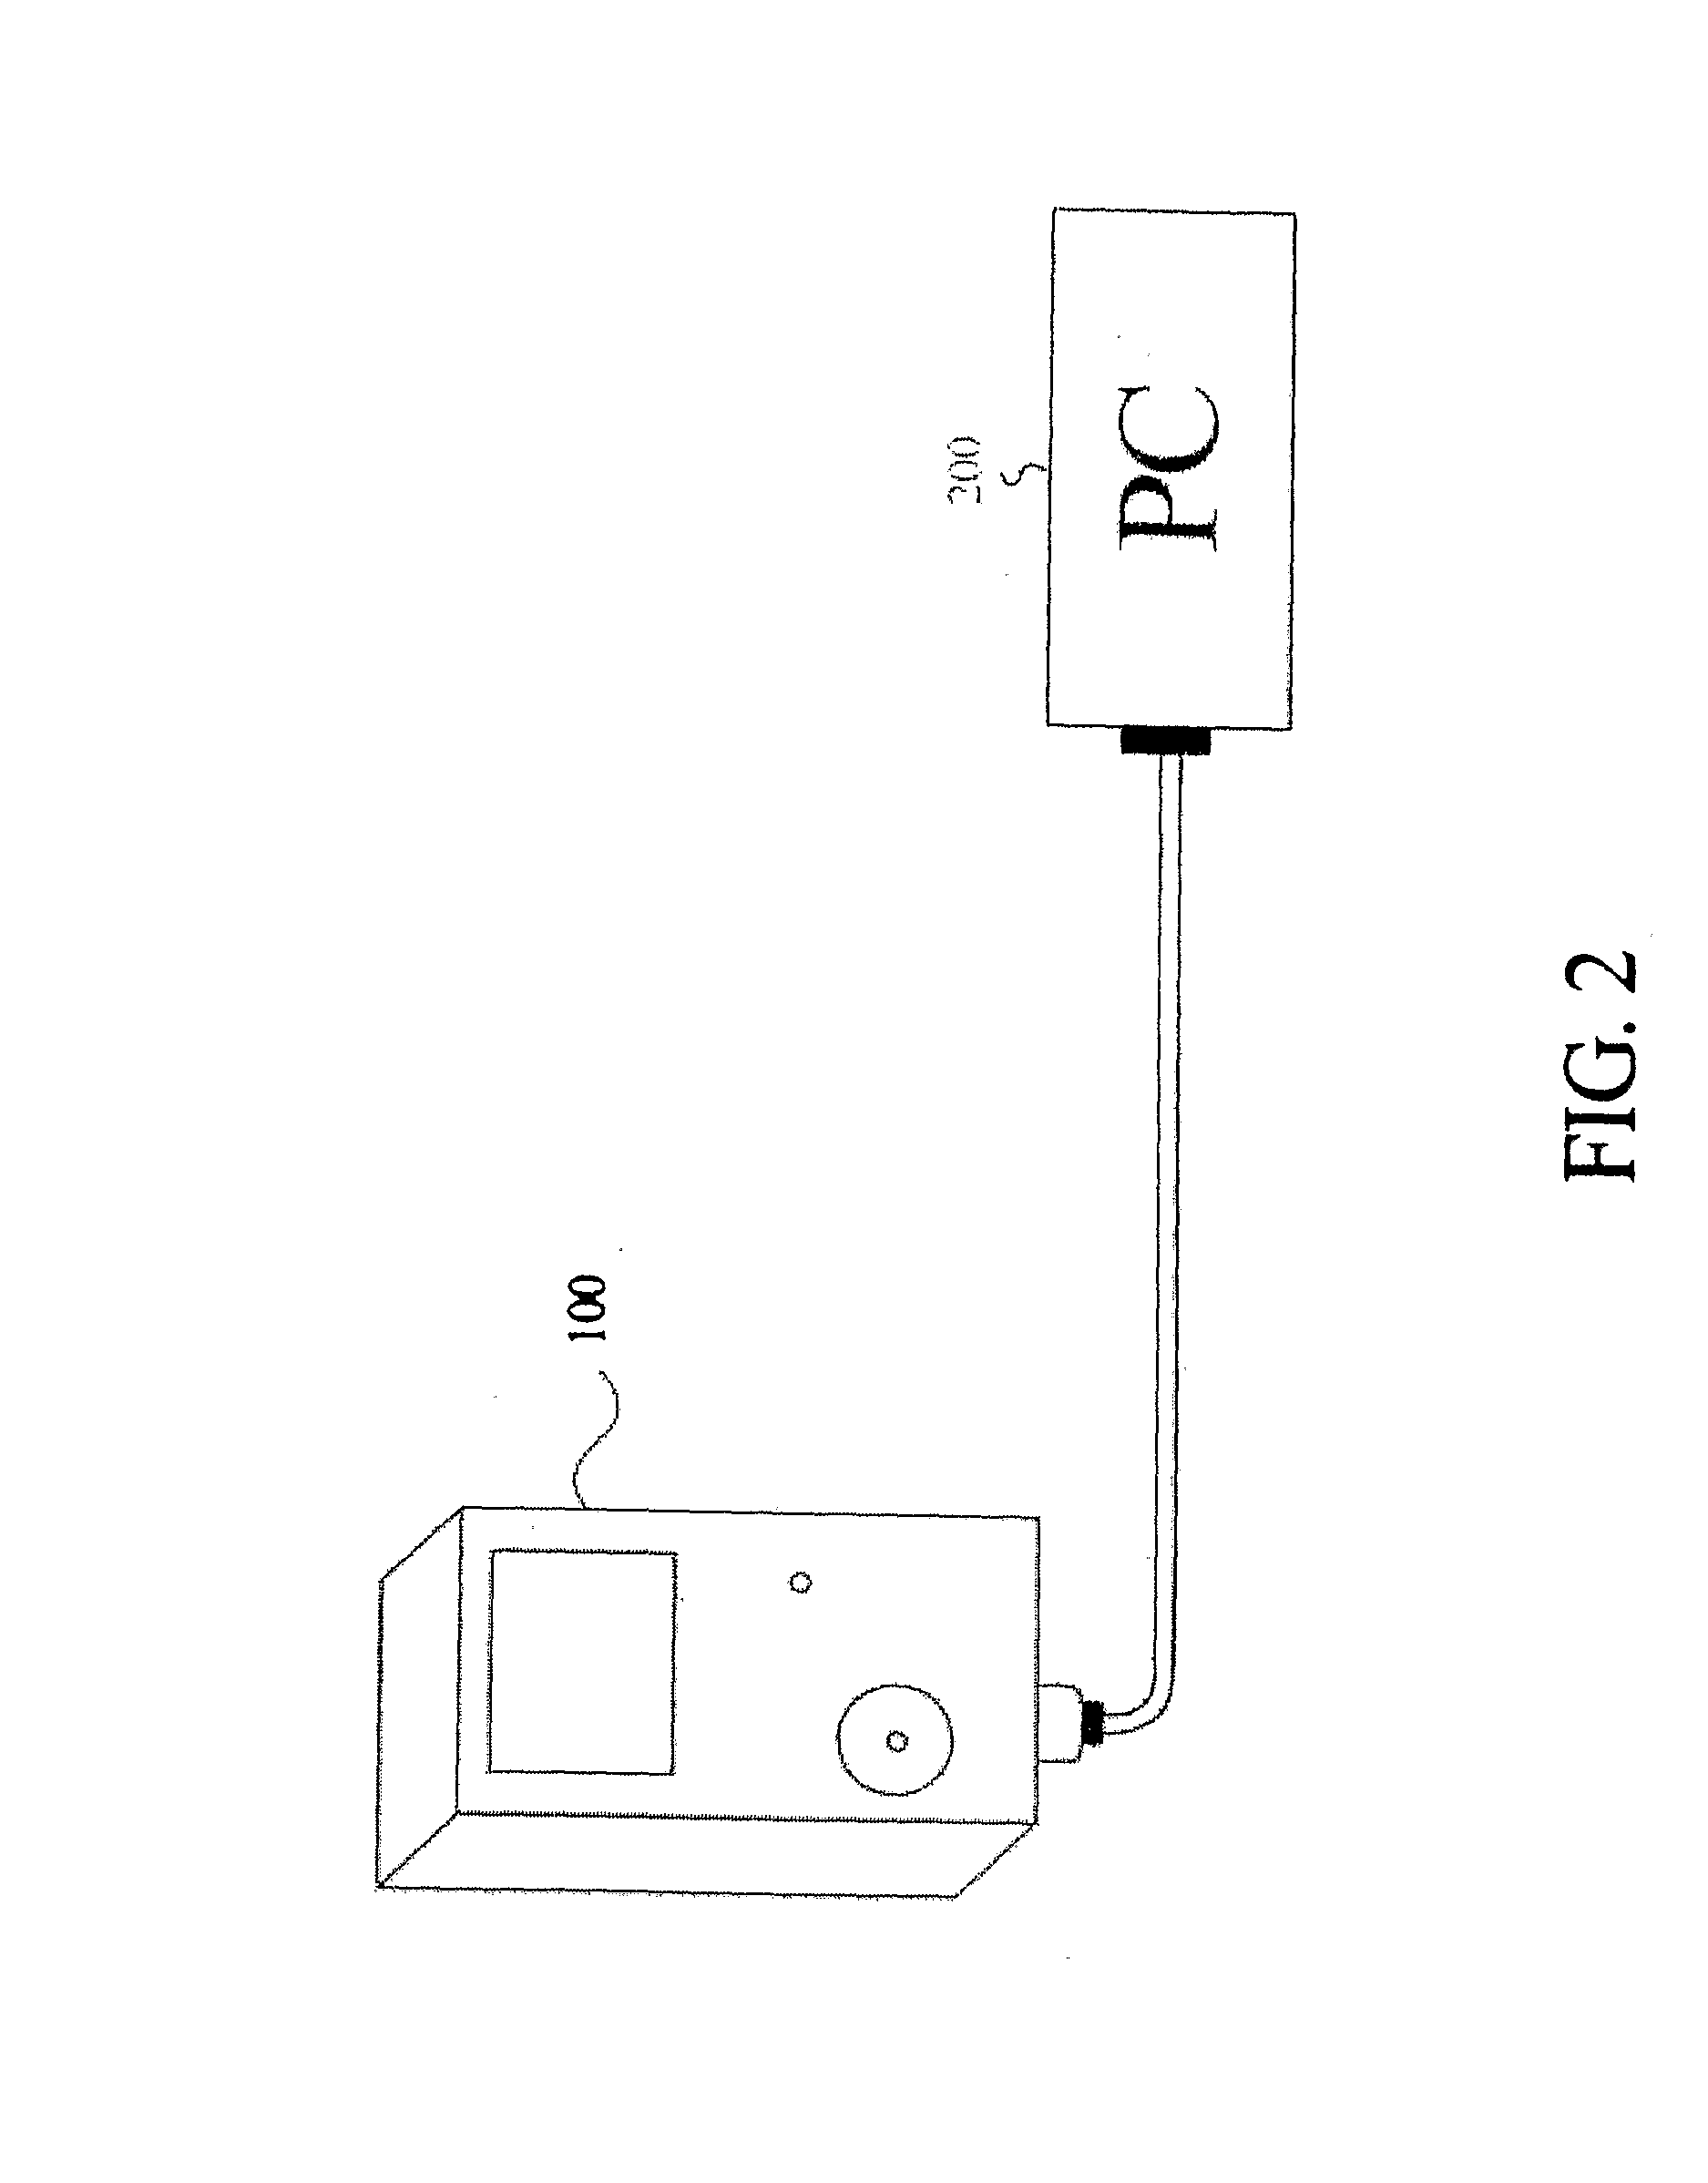 Apparatus and Method for Enabling Digital and Analog Data Communication Over a Data Bus